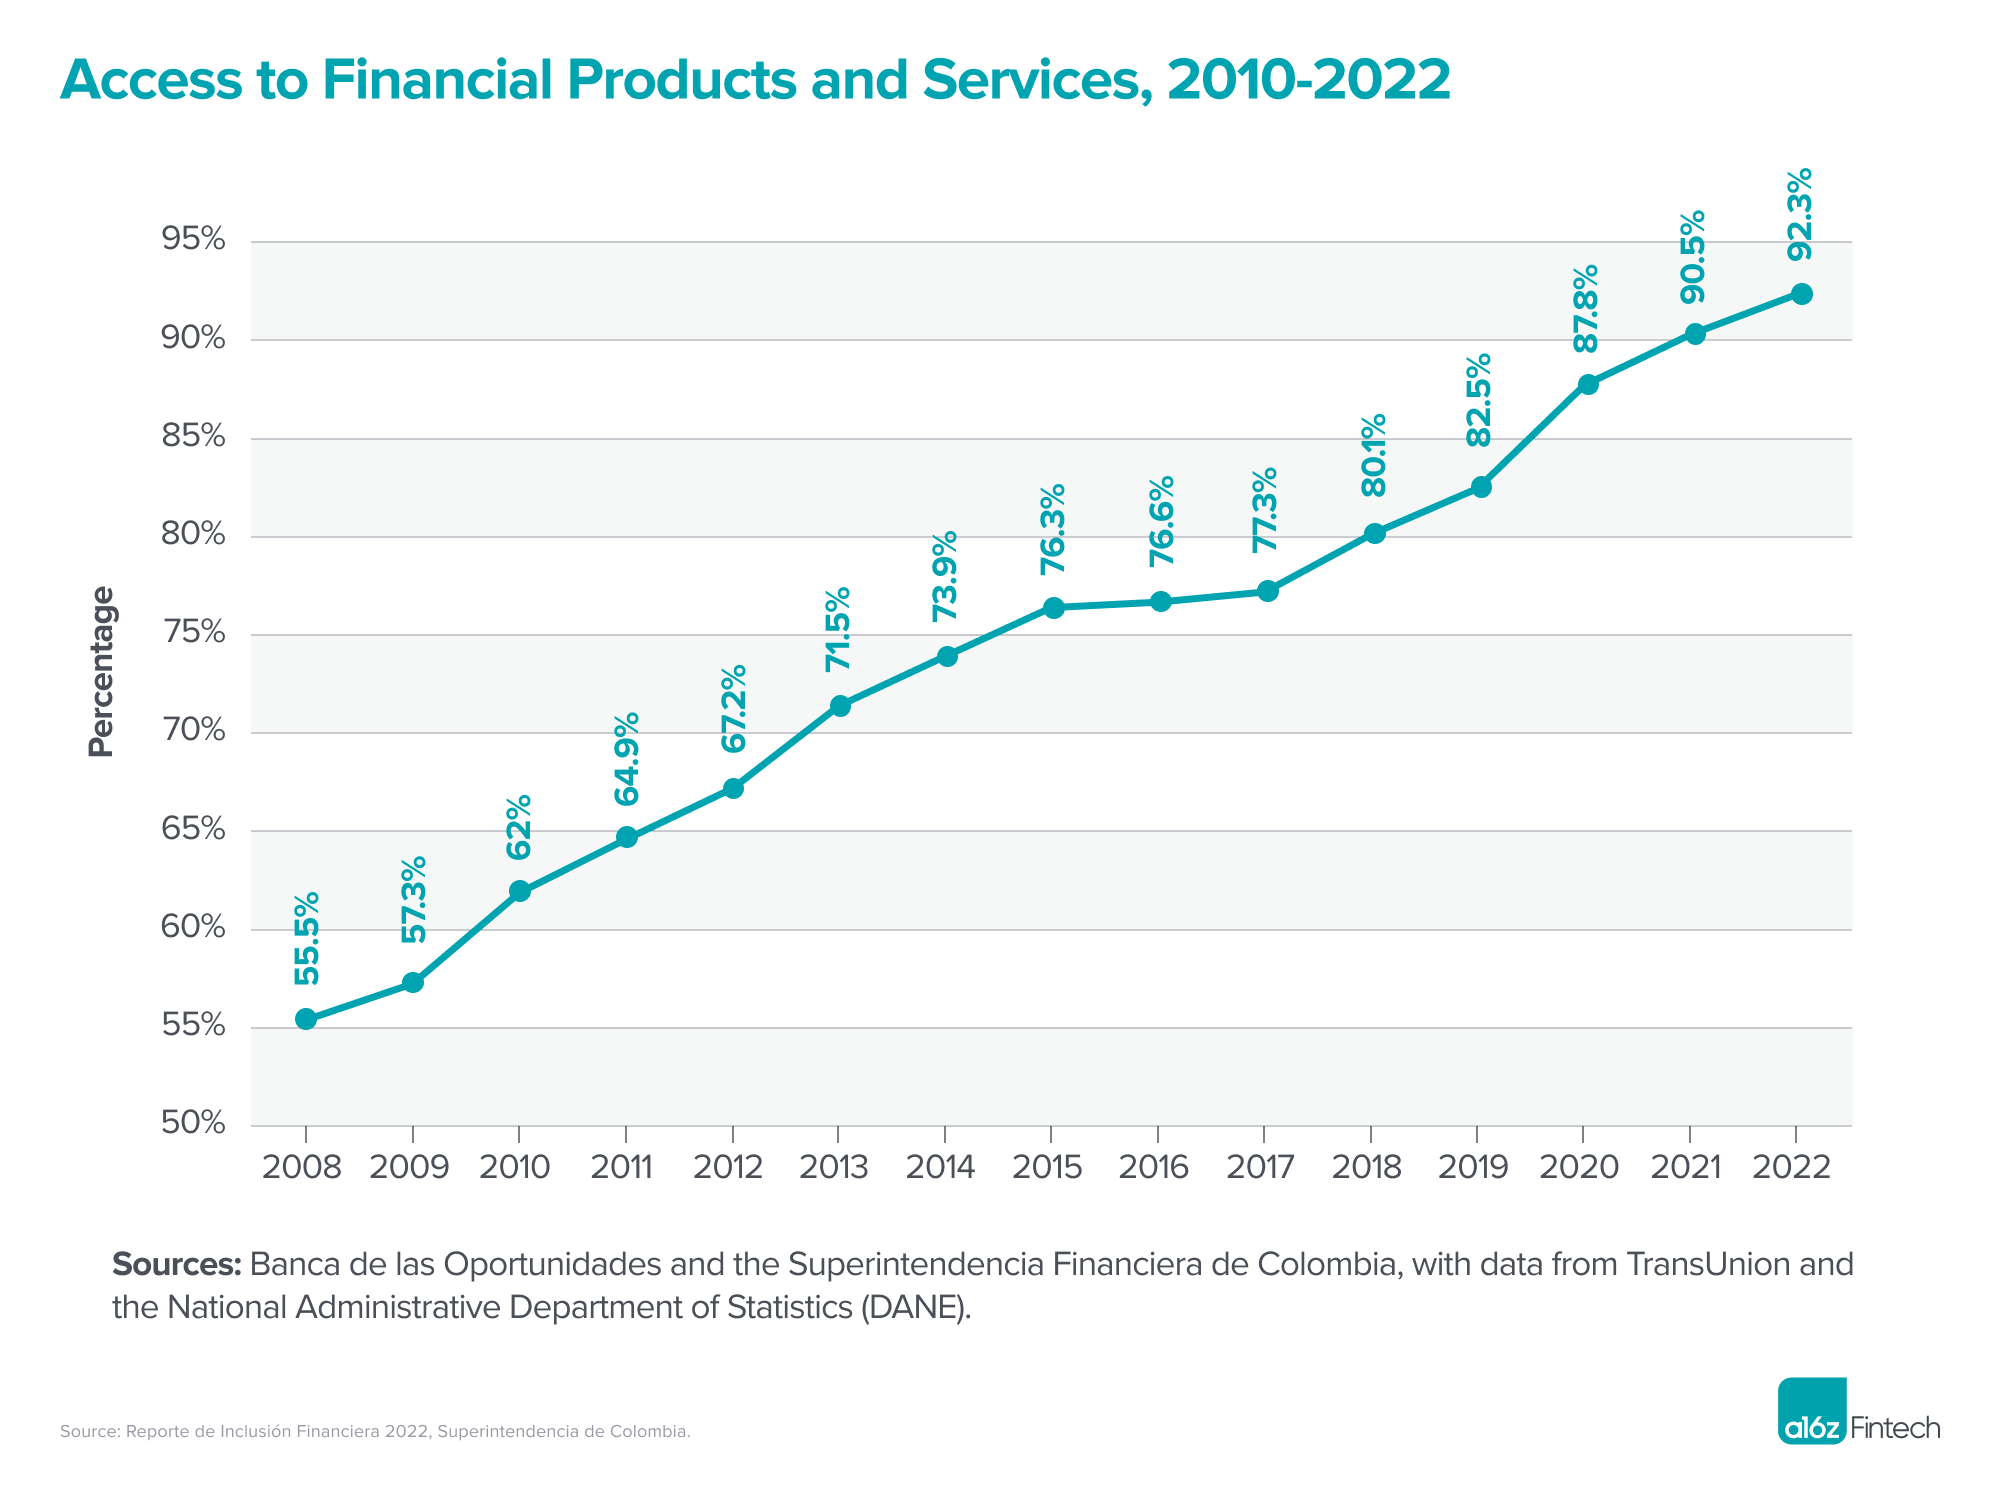 Graph of access to financial products and services in Colombia, 2010-2022